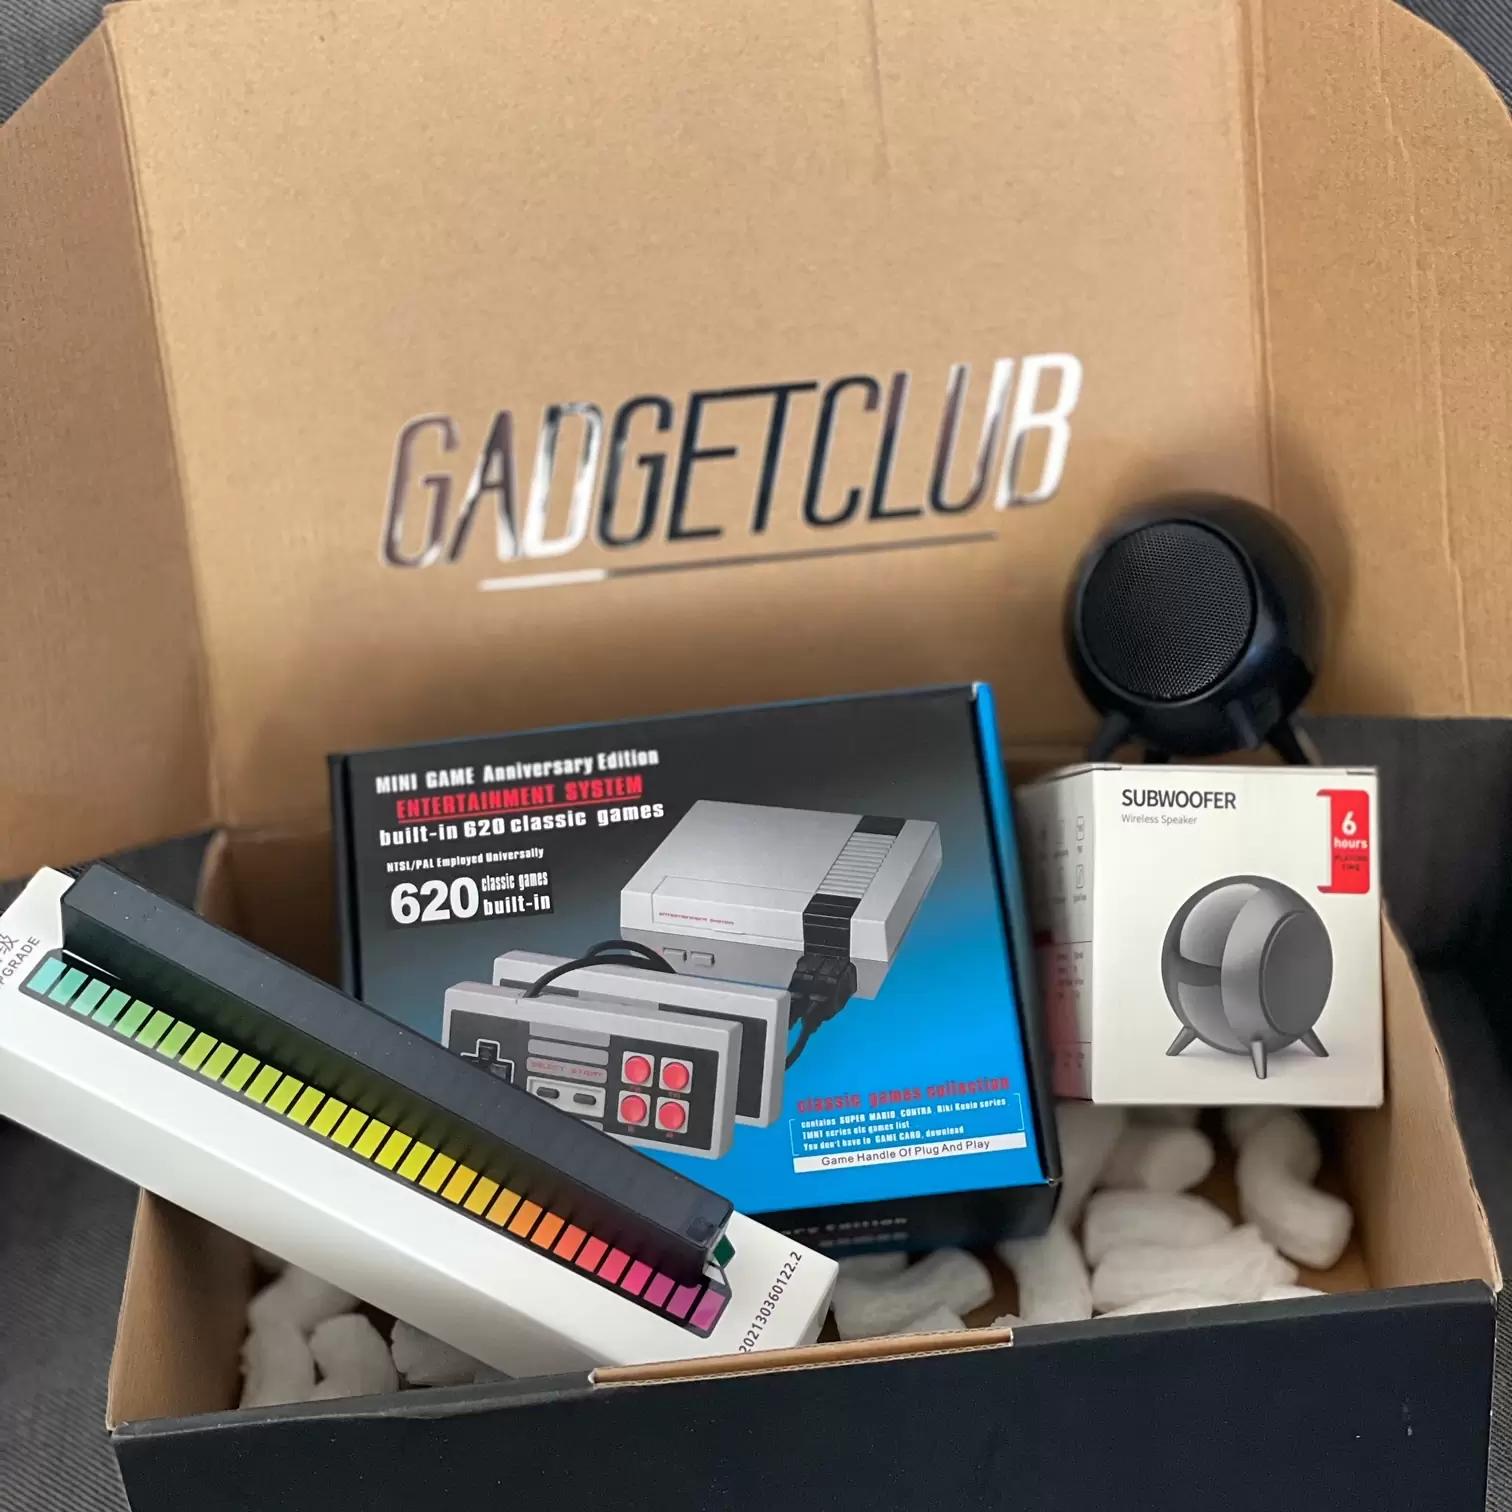 Gadget Club Subscription box for Valentines Day